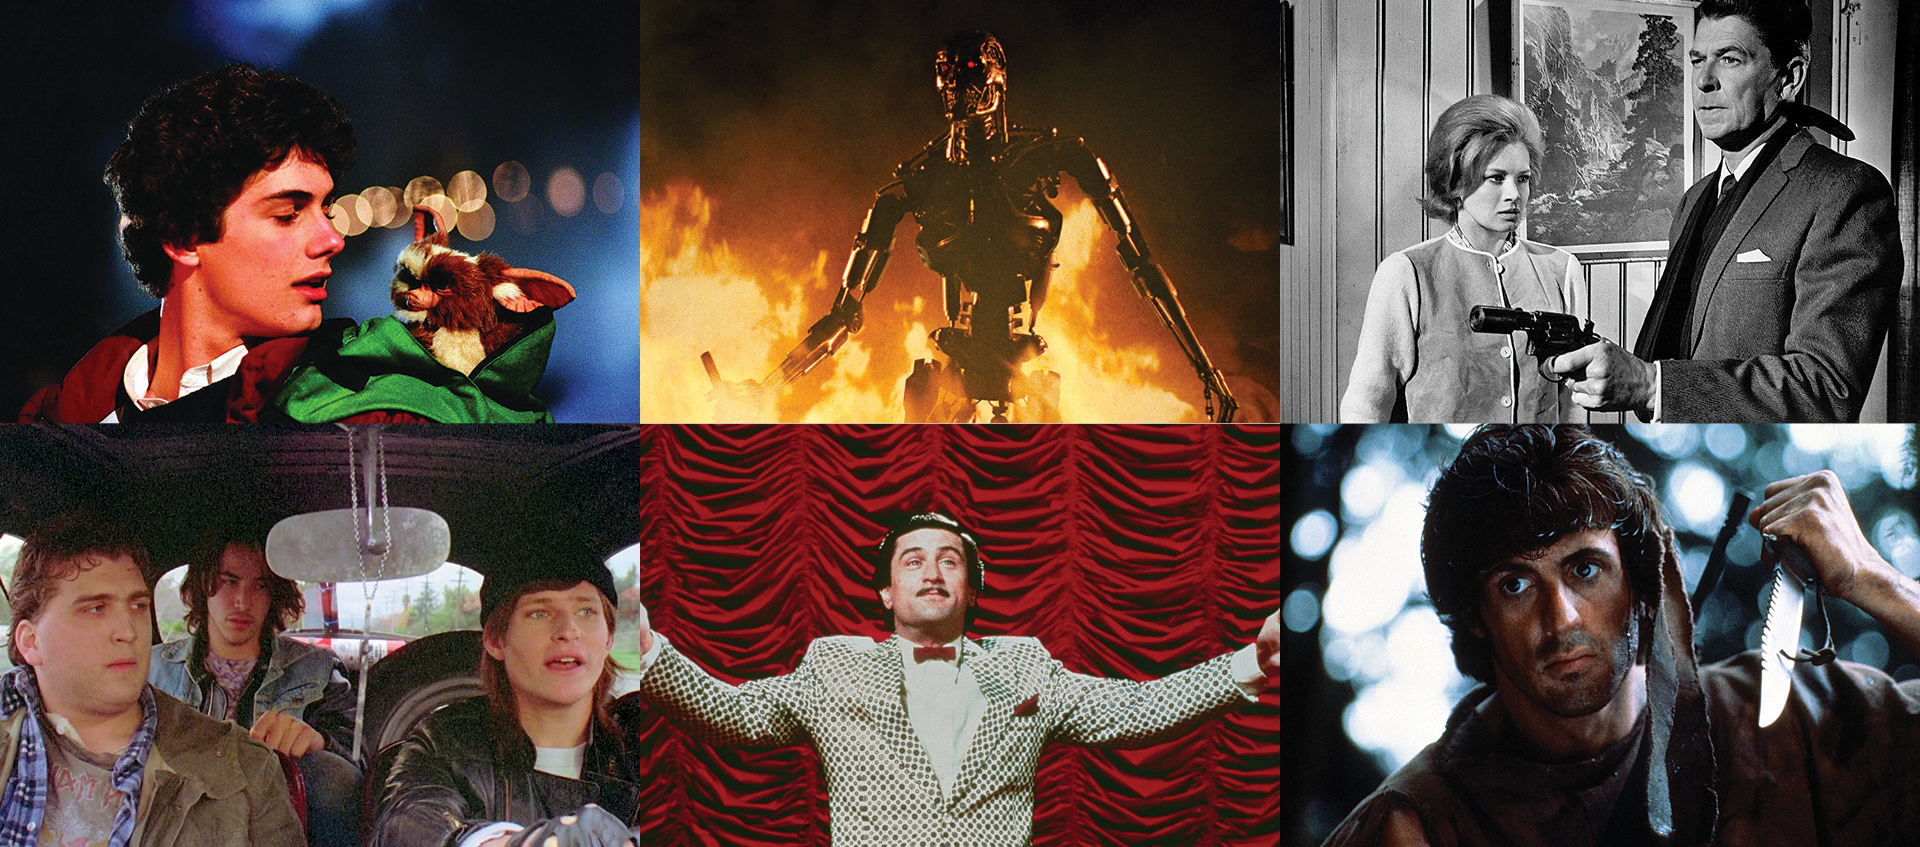 A collage of images from the films Gremlins, The Terminator, The Killers, River's Edge, The King of Comedy, and First Blood, created for the Wexner Center for the Arts film series Make My Day: Movie Culture in the Age of Reagan, based on the book by film critic J. Hoberman